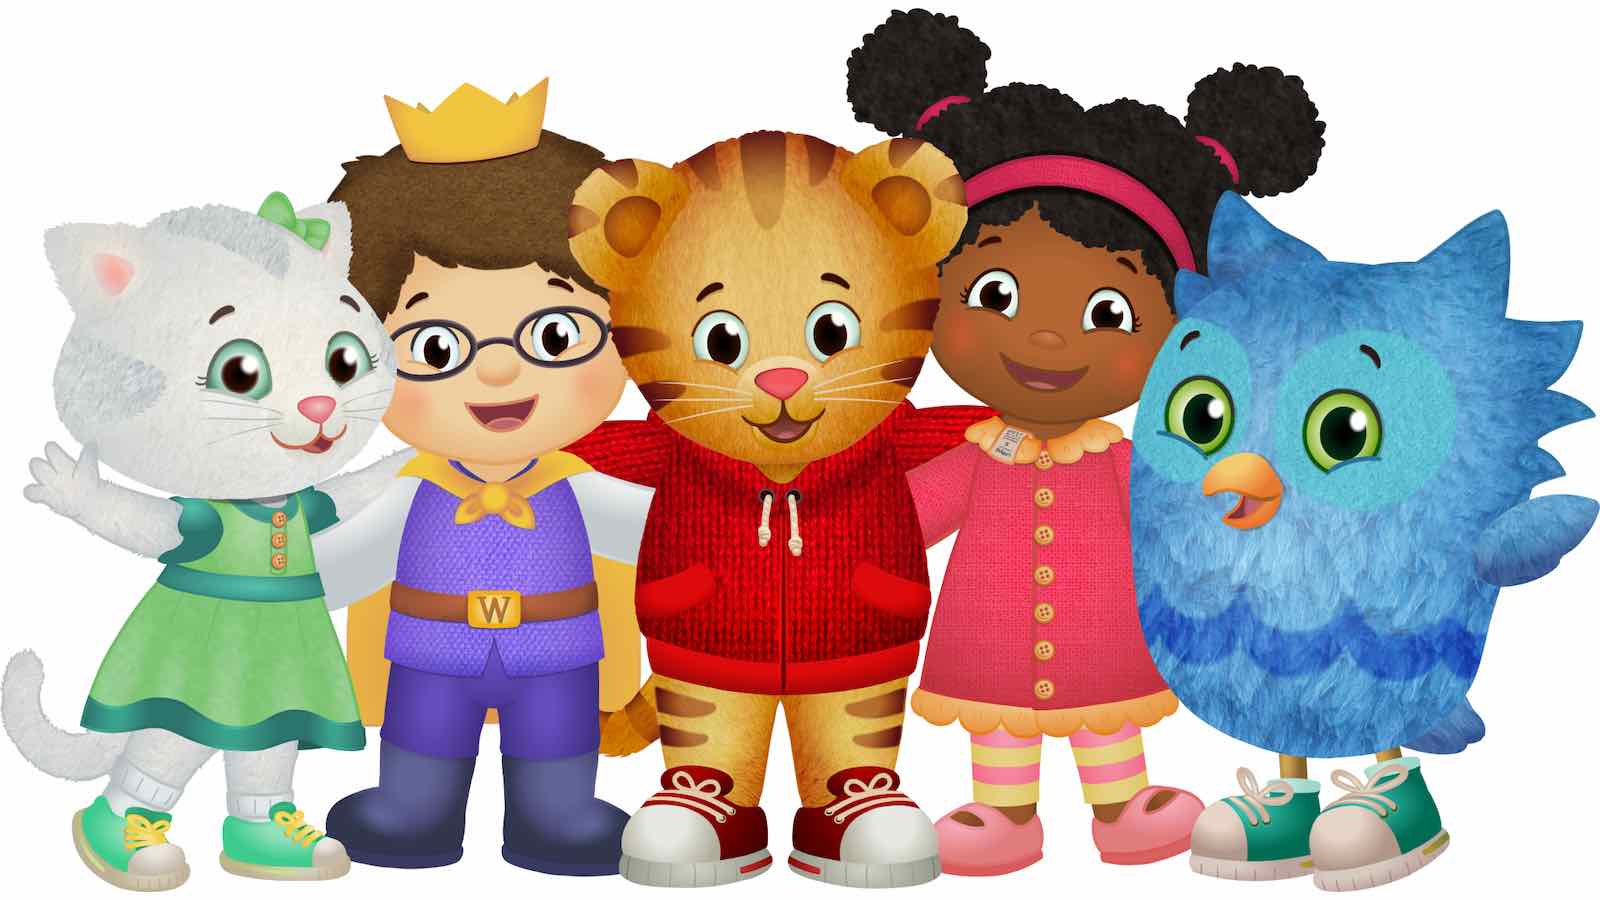 Daniel Tiger': Here are all the best free kid shows on Amazon Video